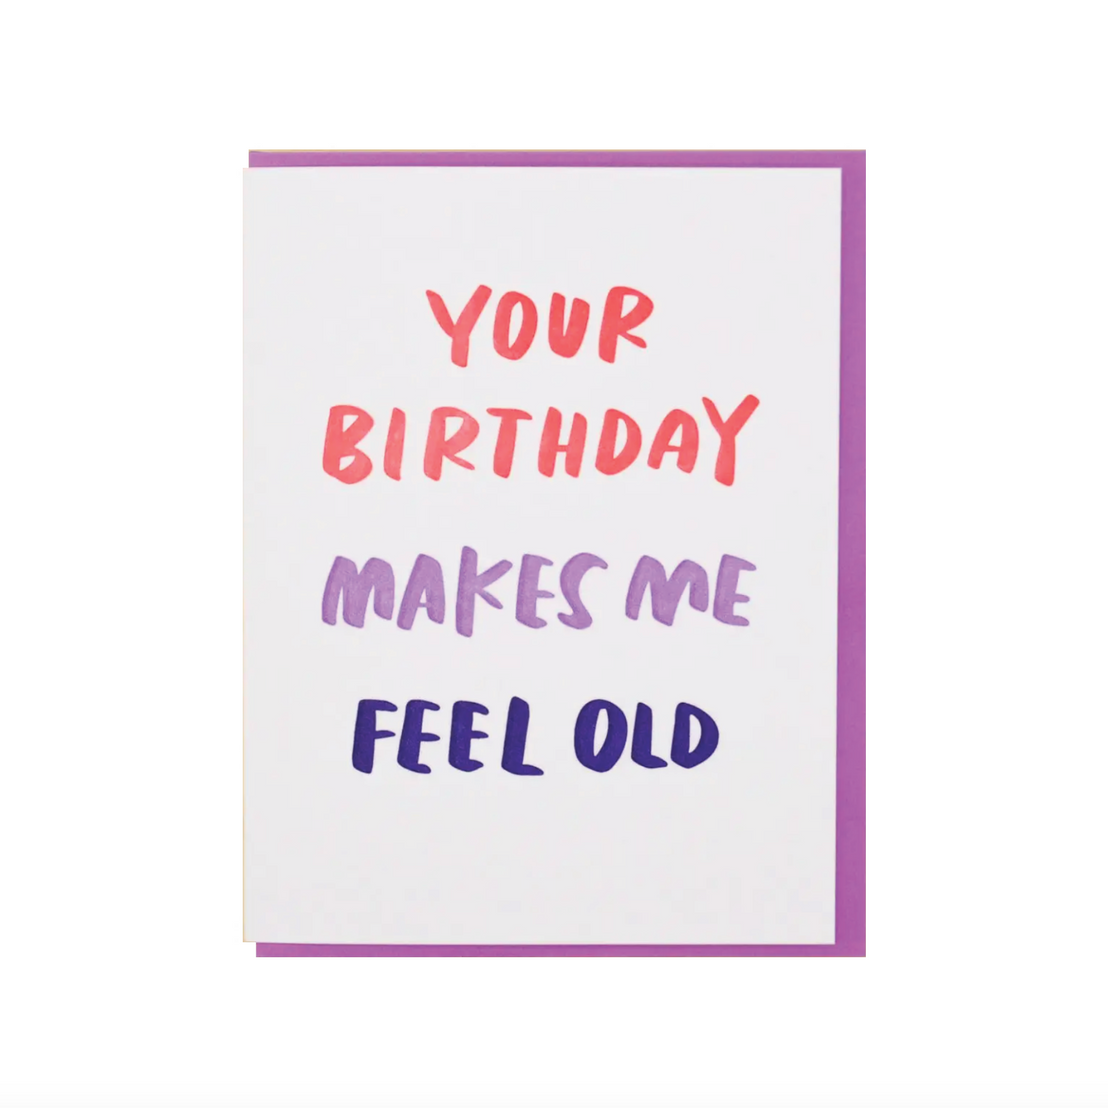 Your Birthday Makes Me Feel Old, And Here We Are